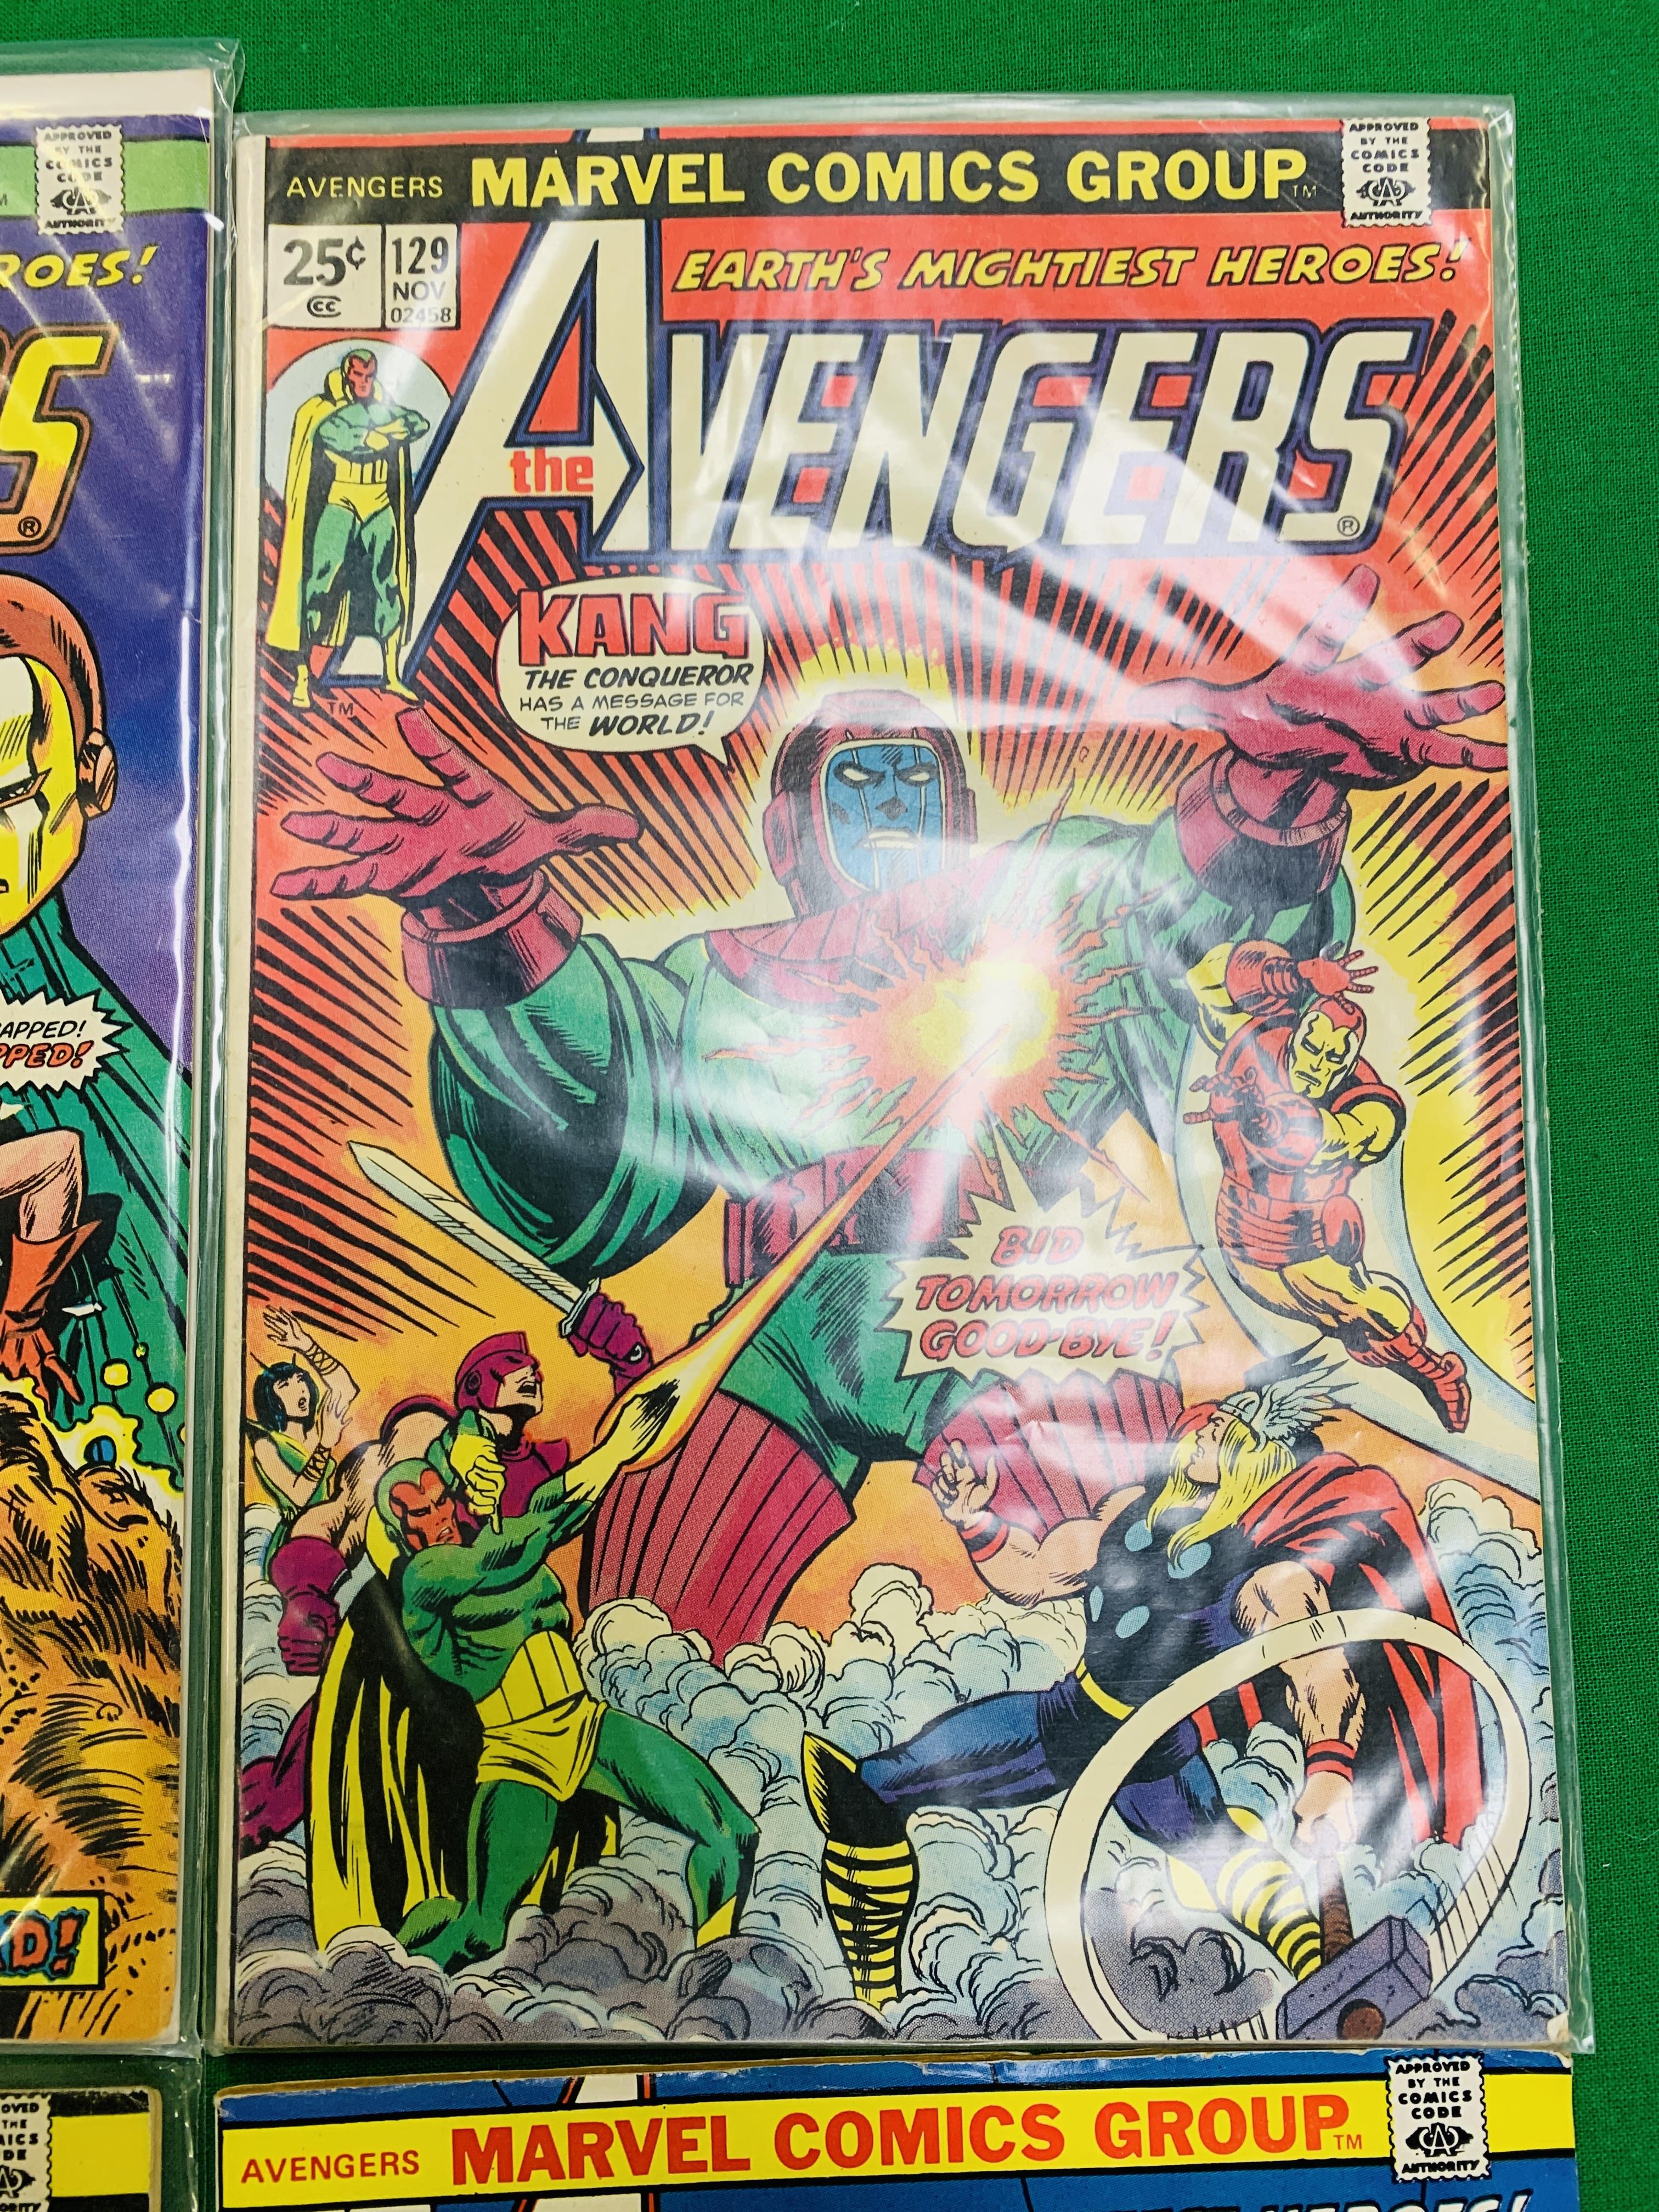 MARVEL COMICS THE AVENGERS NO. 101 - 299, MISSING ISSUES 103 AND 110. - Image 18 of 130